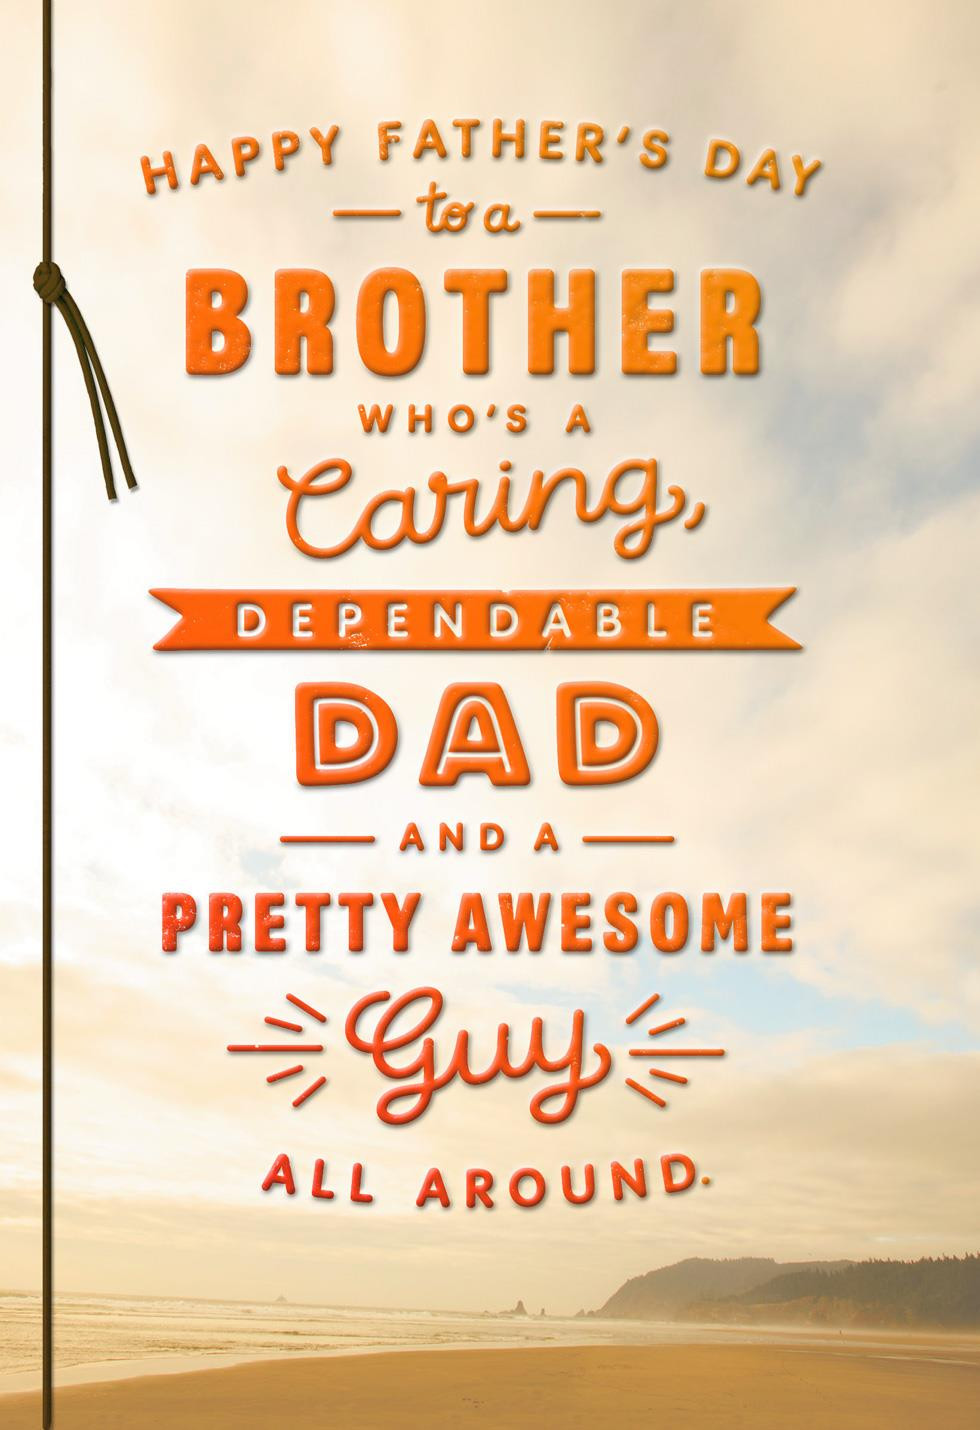 Fathers Day Quotes For Brothers
 Awesome Guy Father s Day Card for Brother Greeting Cards